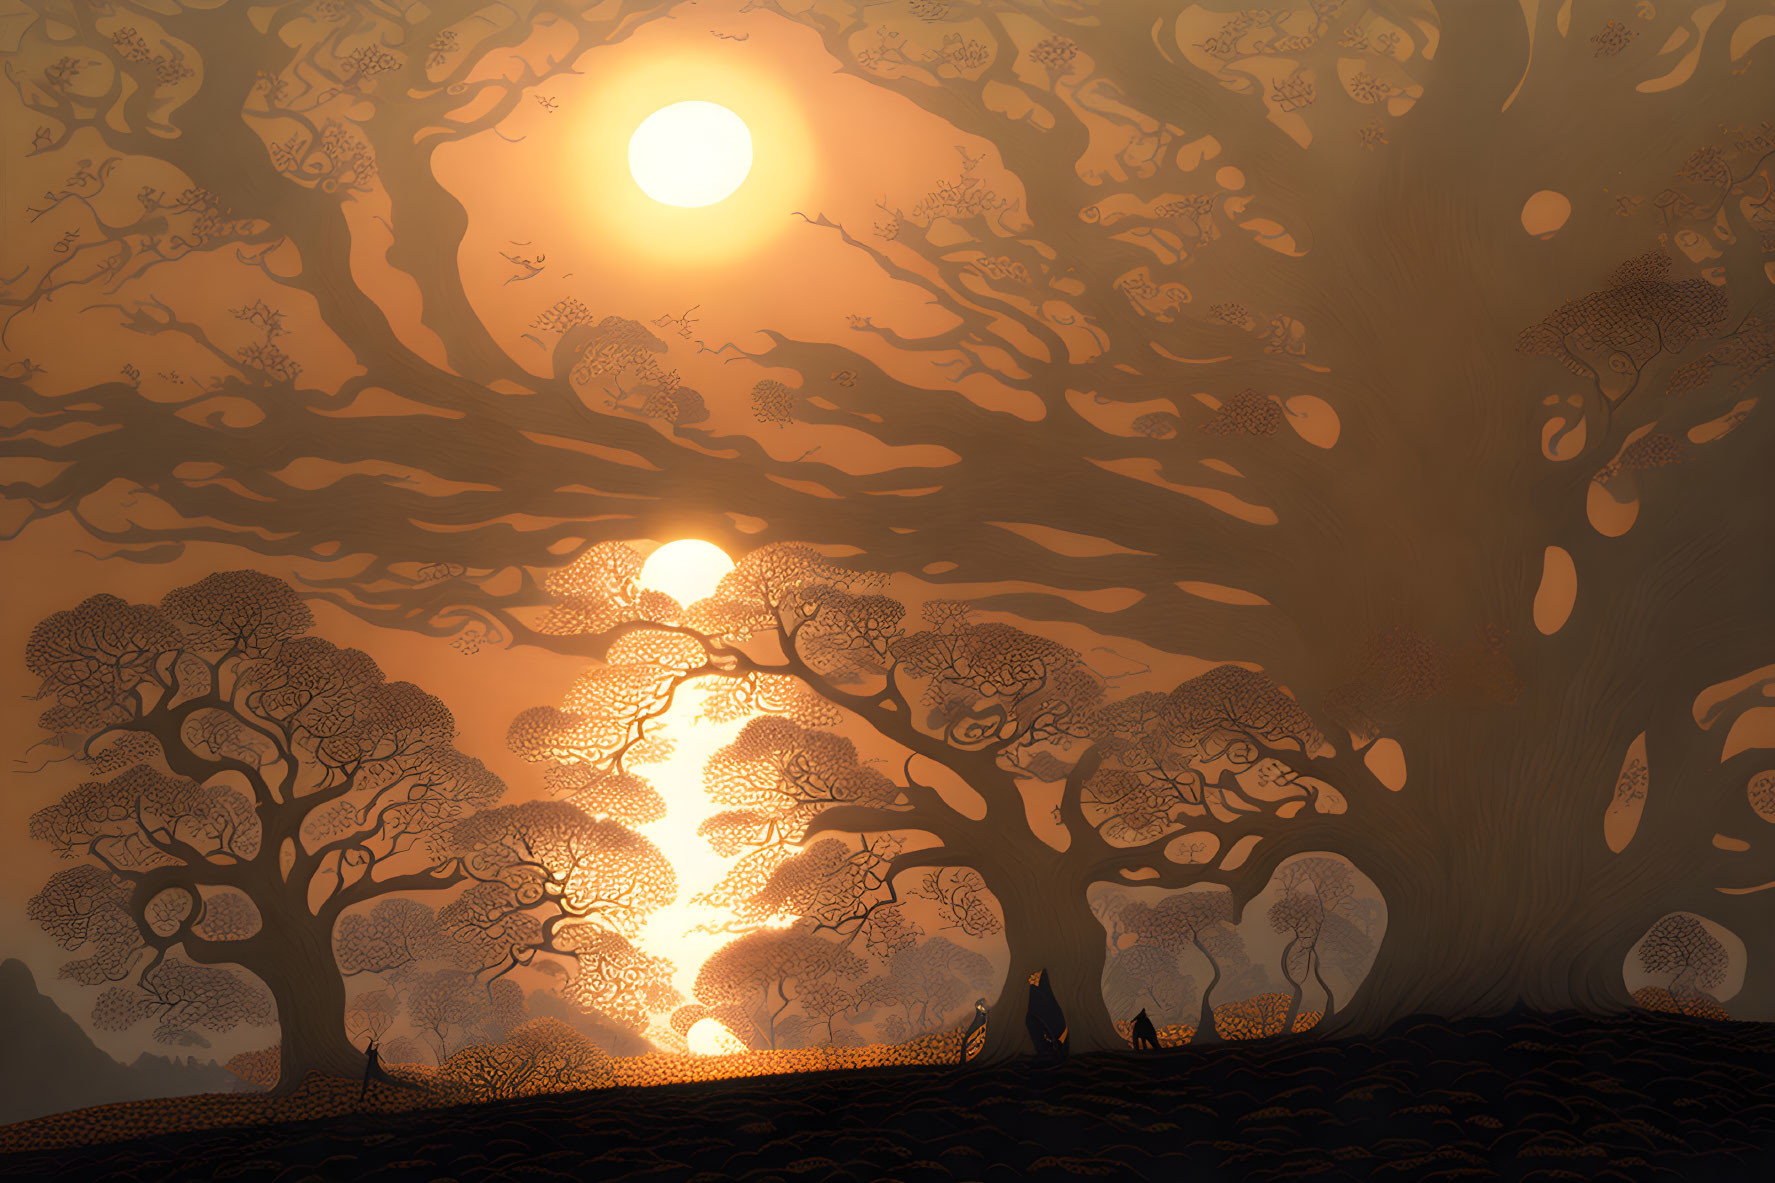 Surreal golden forest with silhouetted trees and small figures under glowing sun